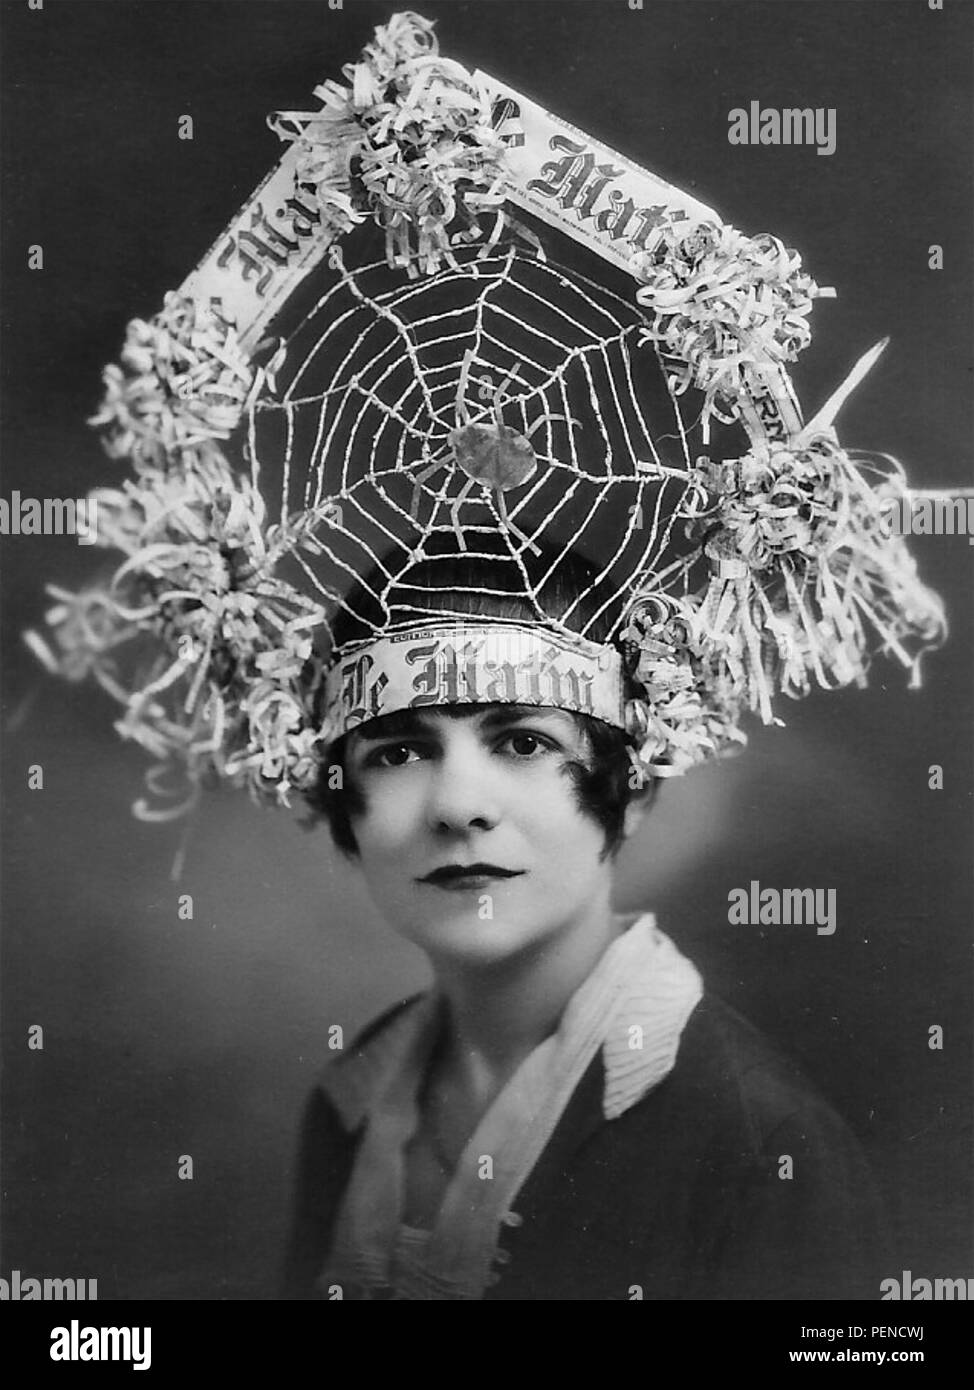 LE MATIN A promotion in the form of a hat made from its pages for the French newspaper about 1910. Le Matin originally sponsored the Tour de France  as a promotional vehicle. Stock Photo